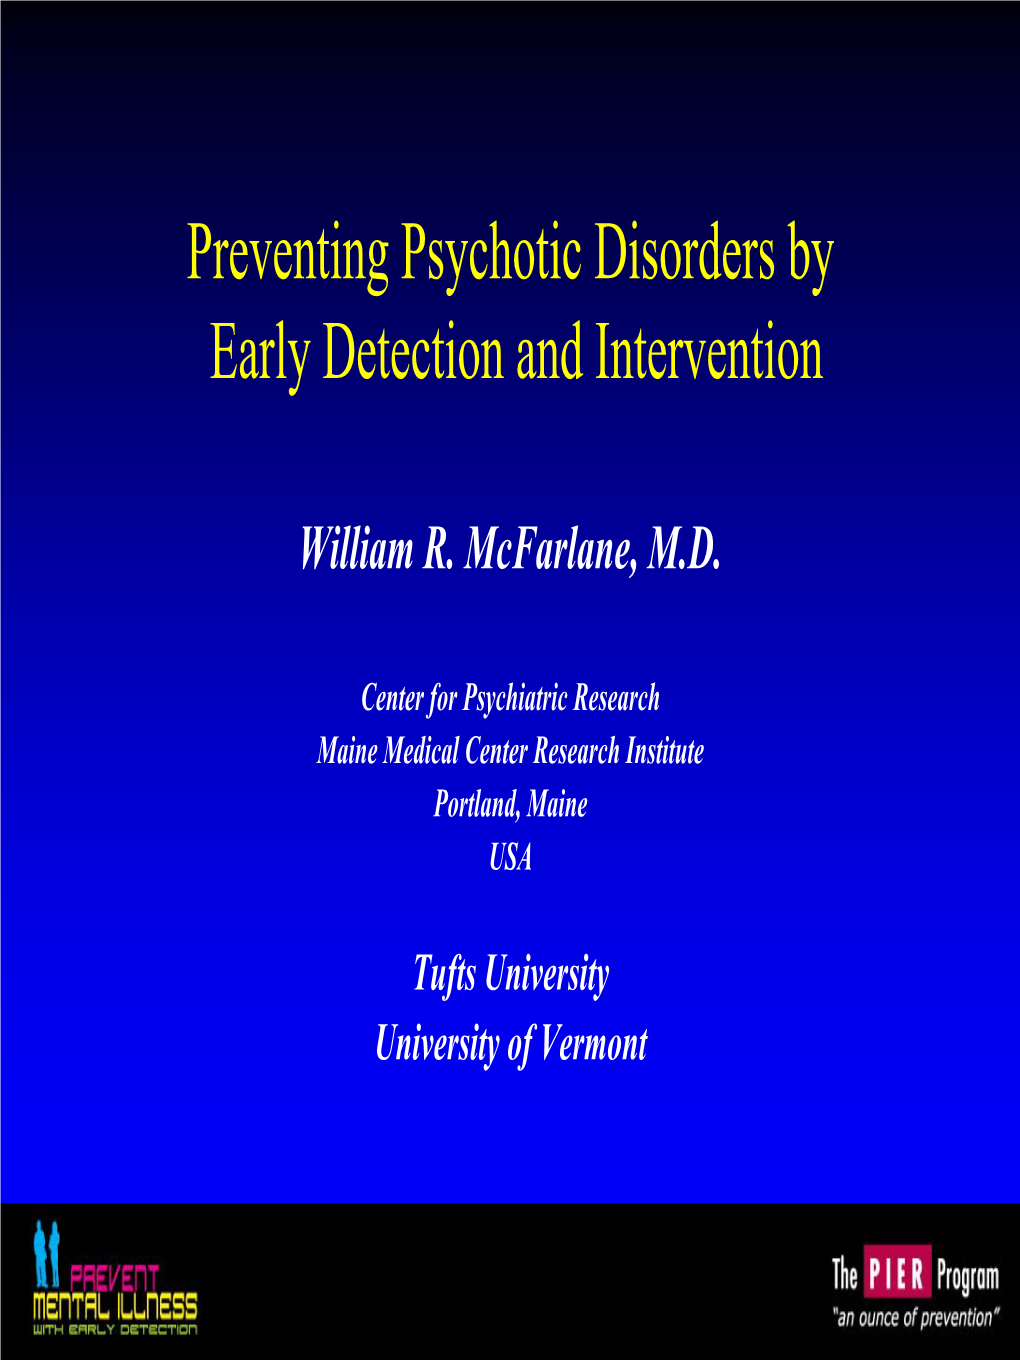 Preventing Psychotic Disorders by Early Detection and Intervention